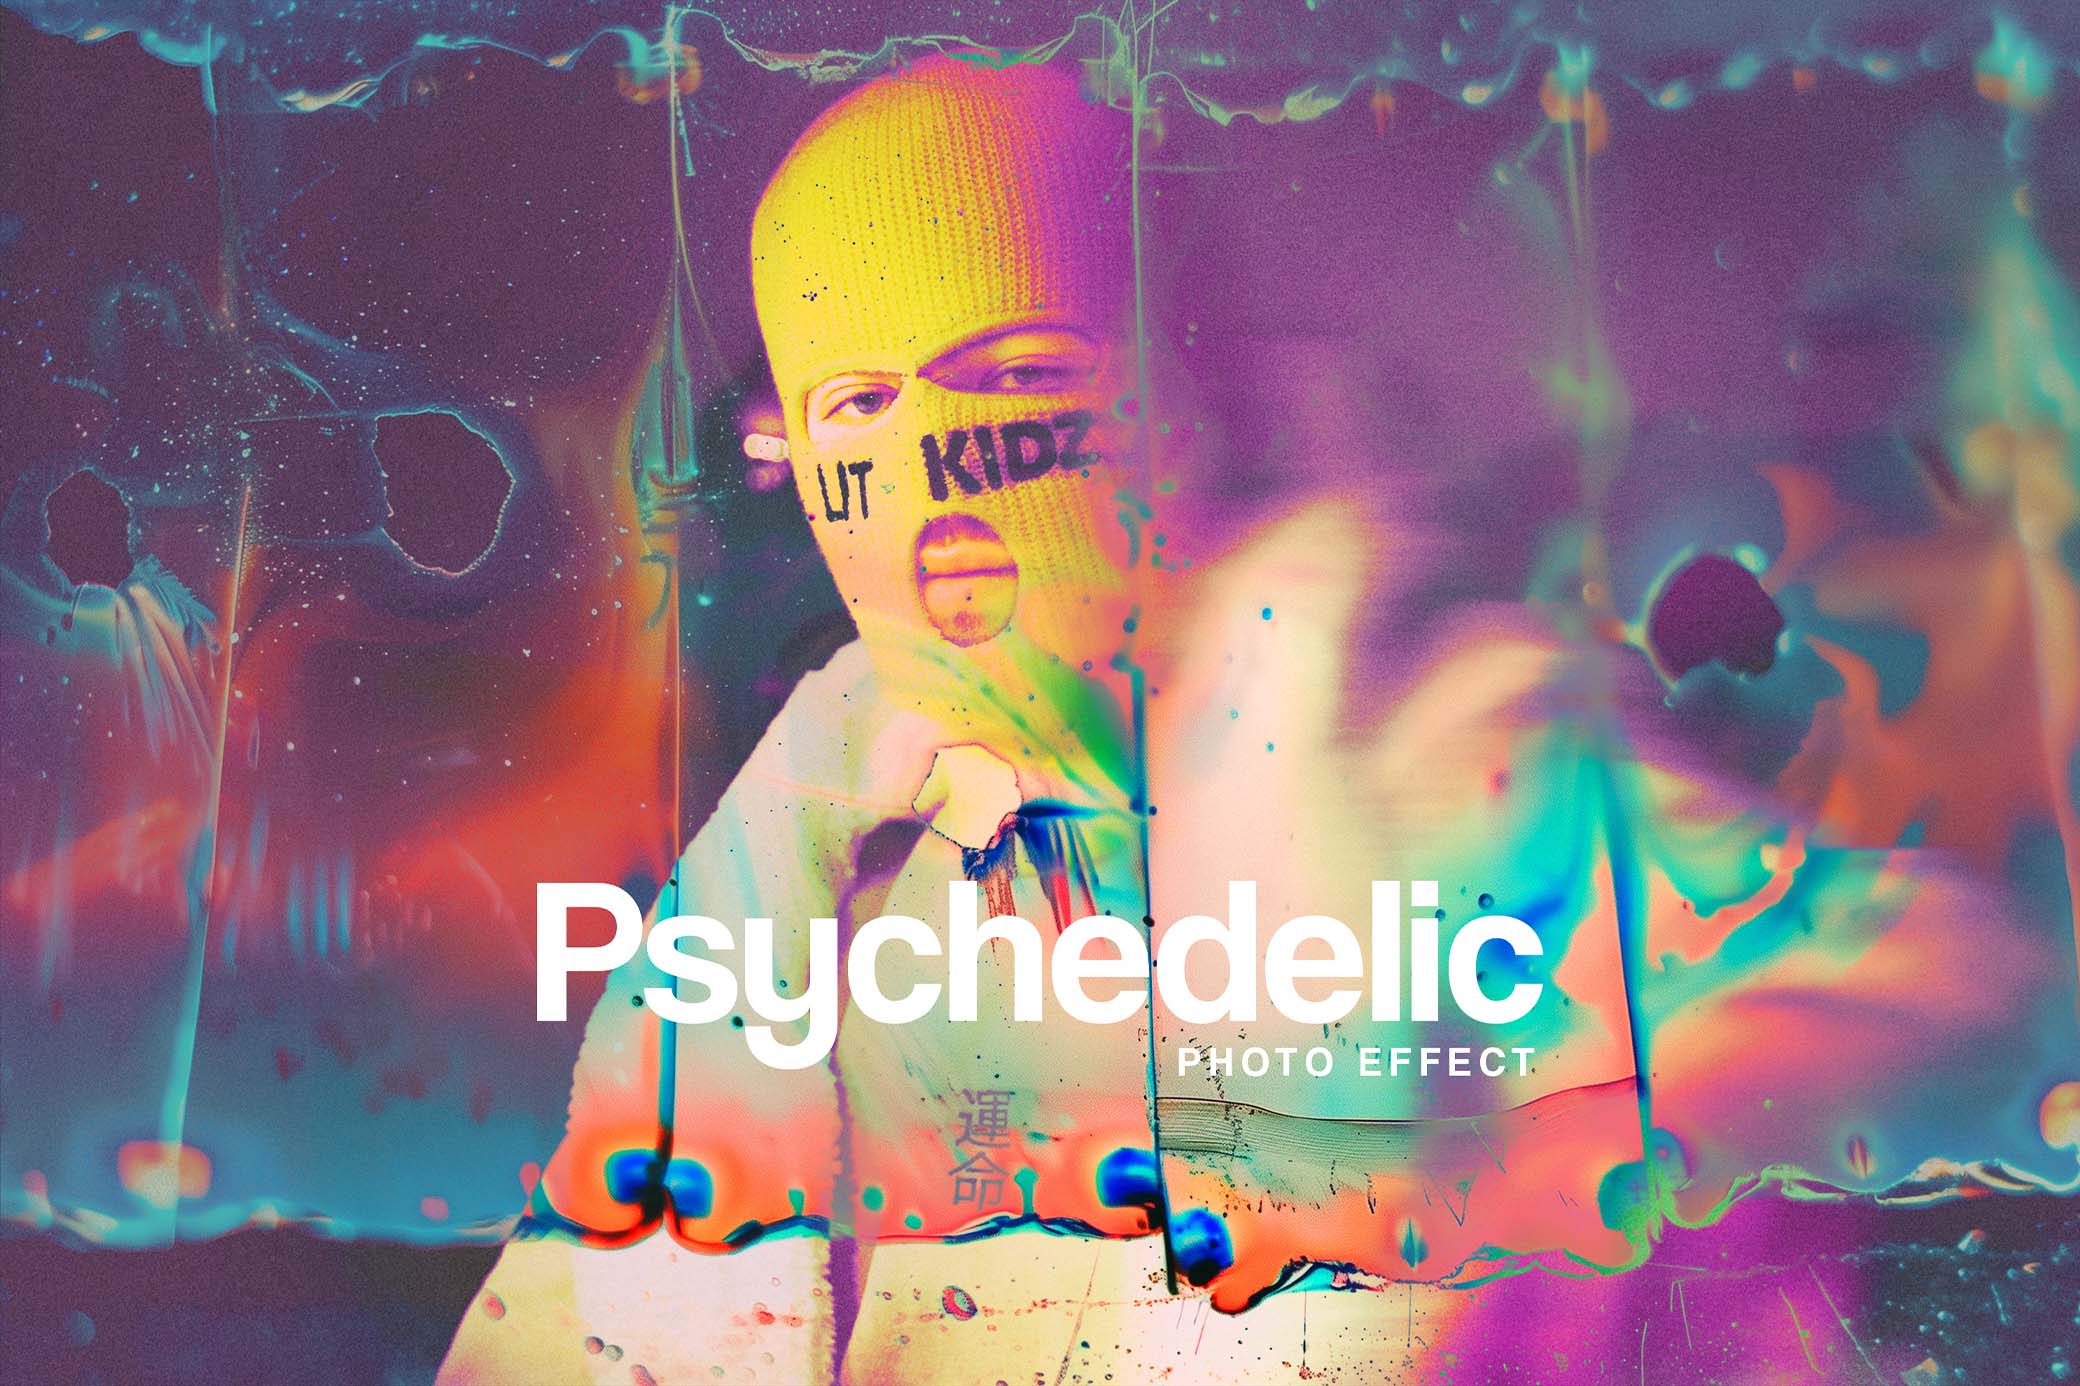 Psychedelic Film Photo Effect